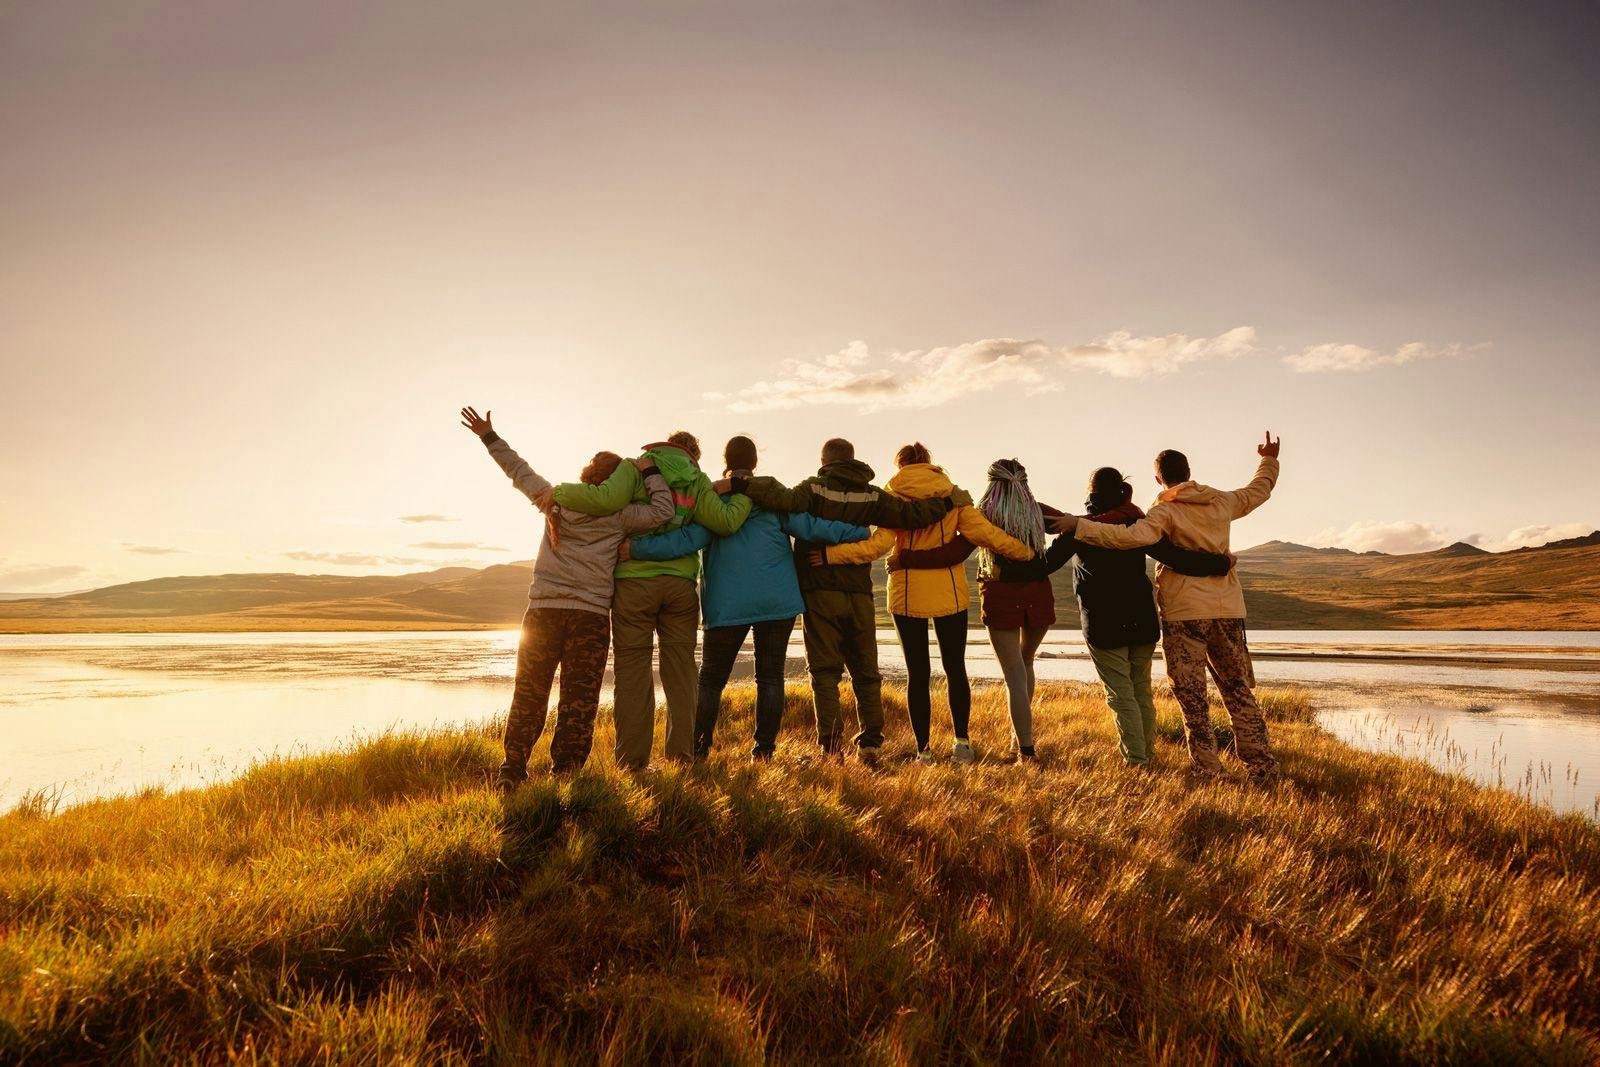 A large group of people standing on a grassy hill watching a sunset